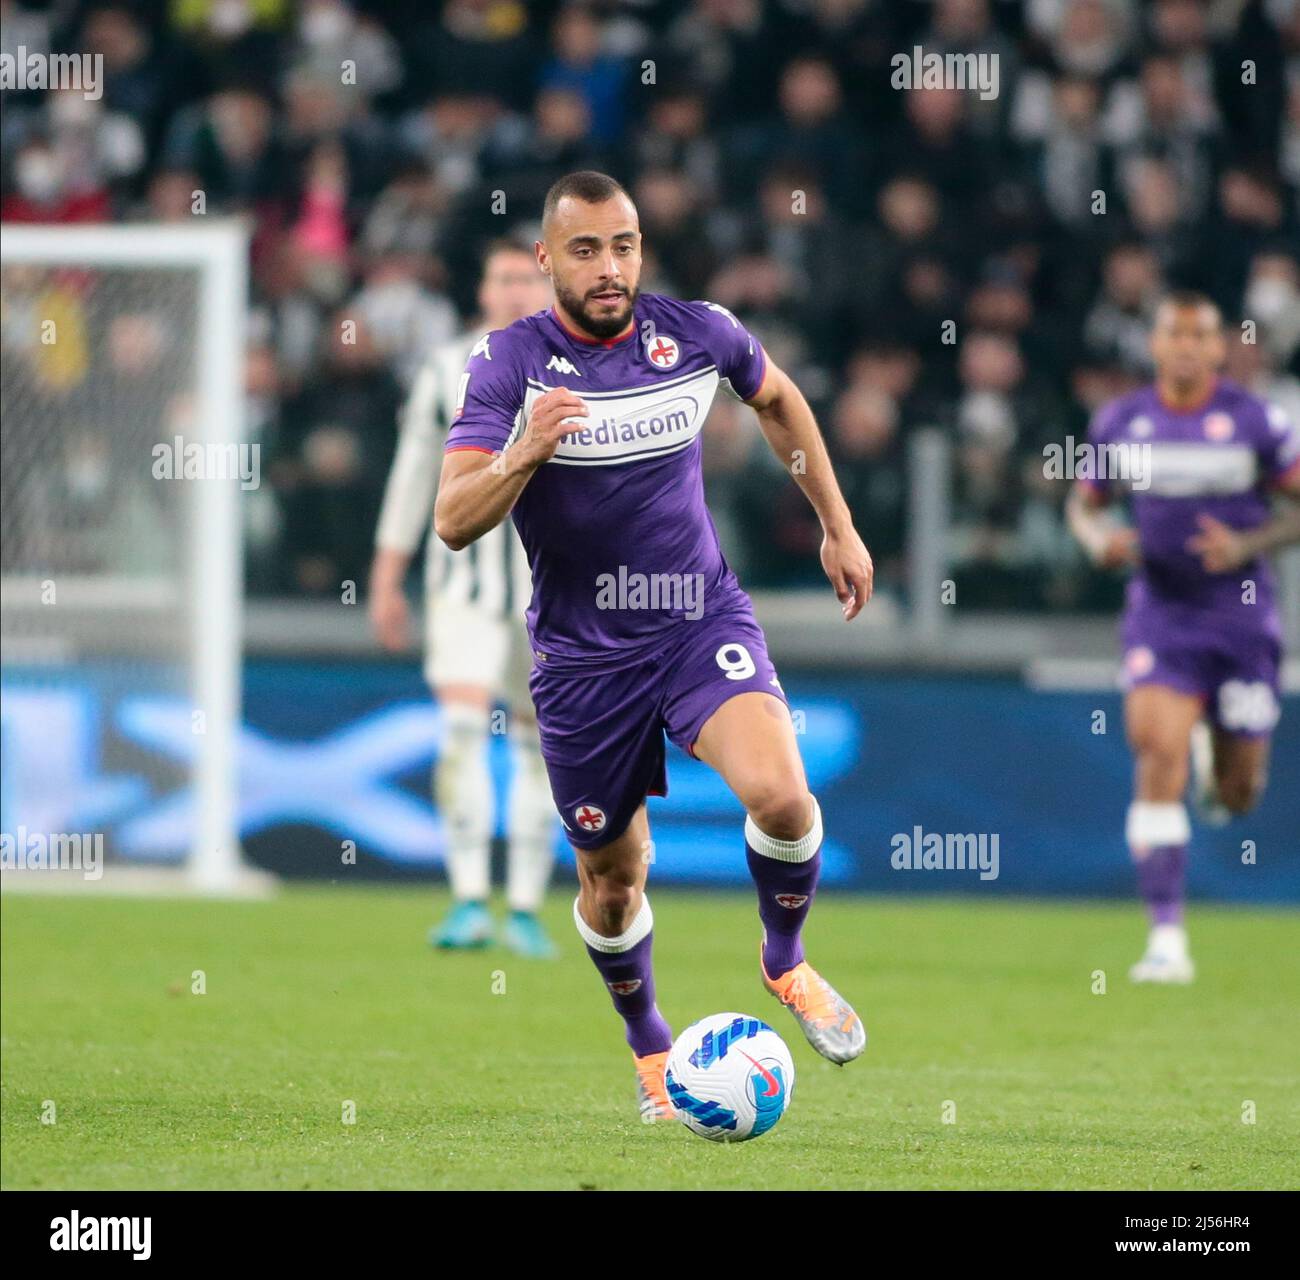 Turin, Italy. 20th Apr, 2022. Arthur Cabral of ACF Fiorentina during the Italian Cup, Coppa Italia, semi-finals 2nd leg football match between Juventus FC and ACF Fiorentina on April 20, 2022 at Allianz stadium in Turin, Italy Credit: Independent Photo Agency/Alamy Live News Stock Photo